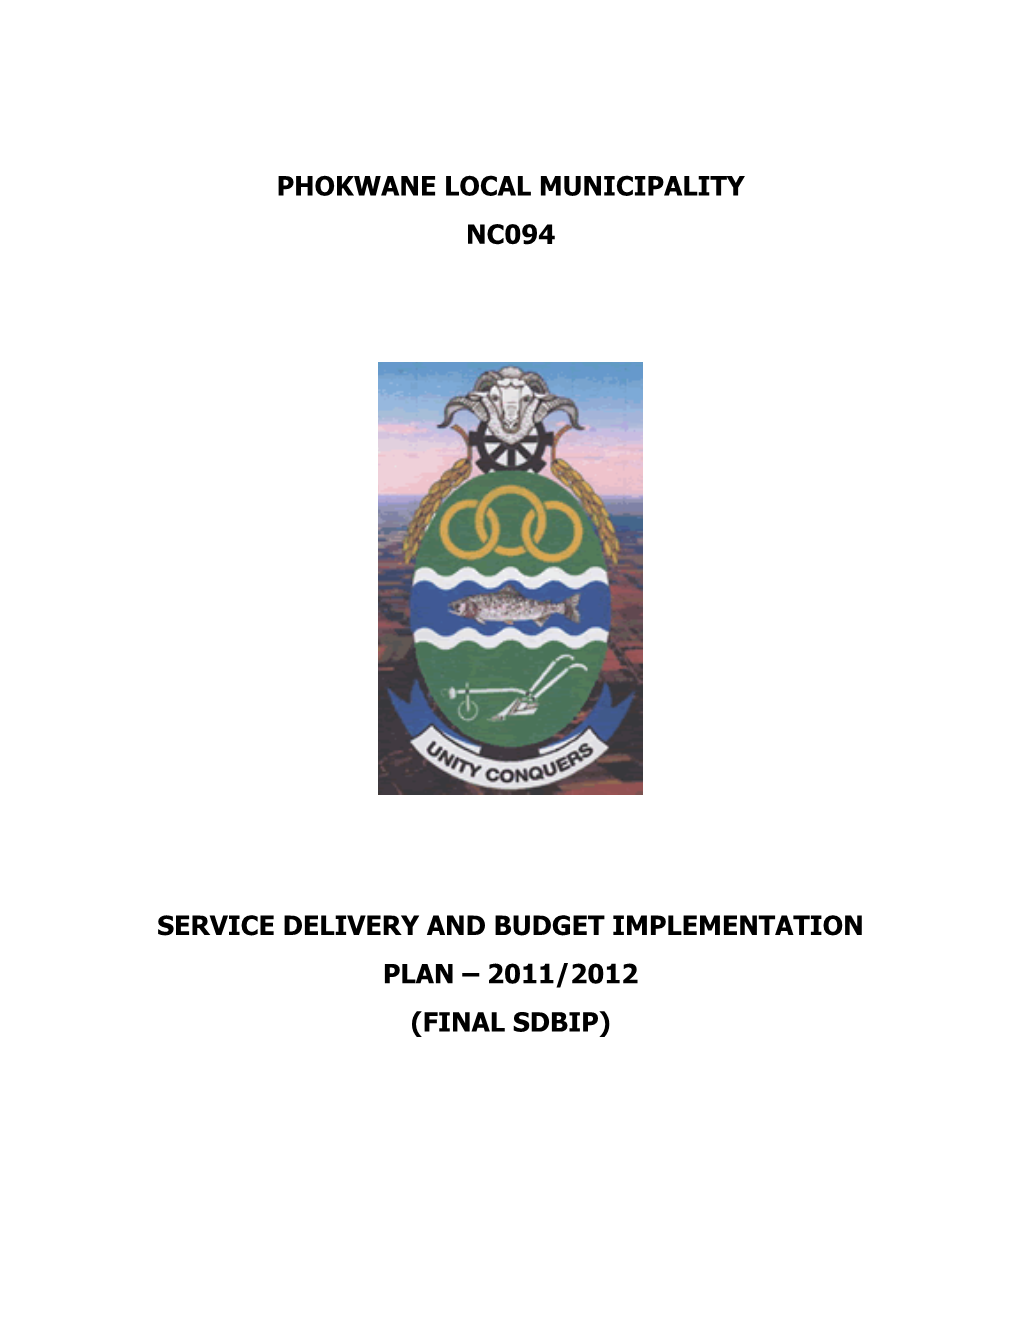 Phokwane Local Municipality Nc094 Service Delivery And